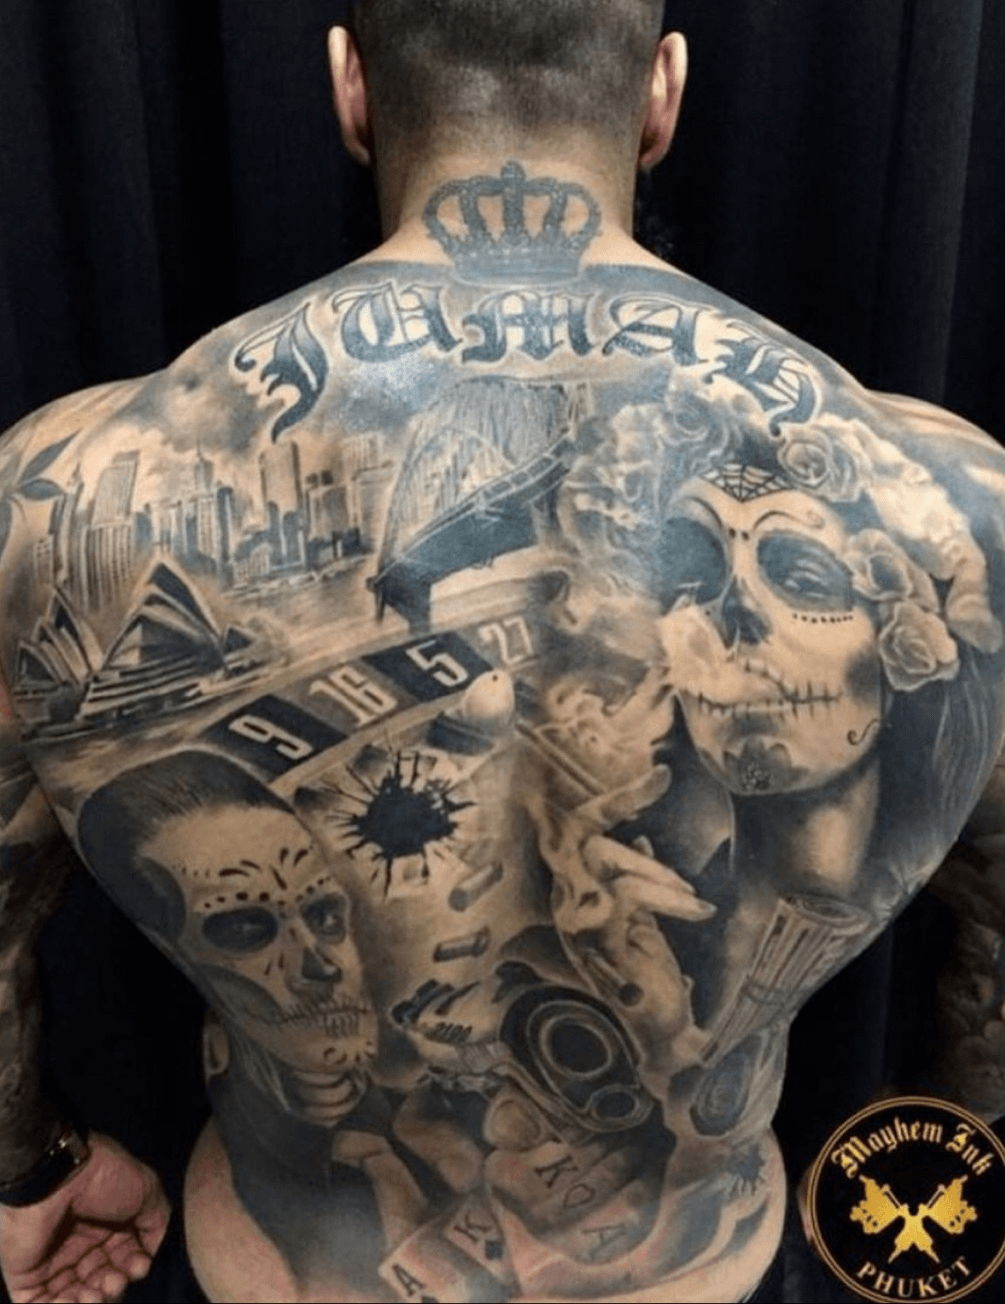 Awesome Gangster Tattoo On Full Back